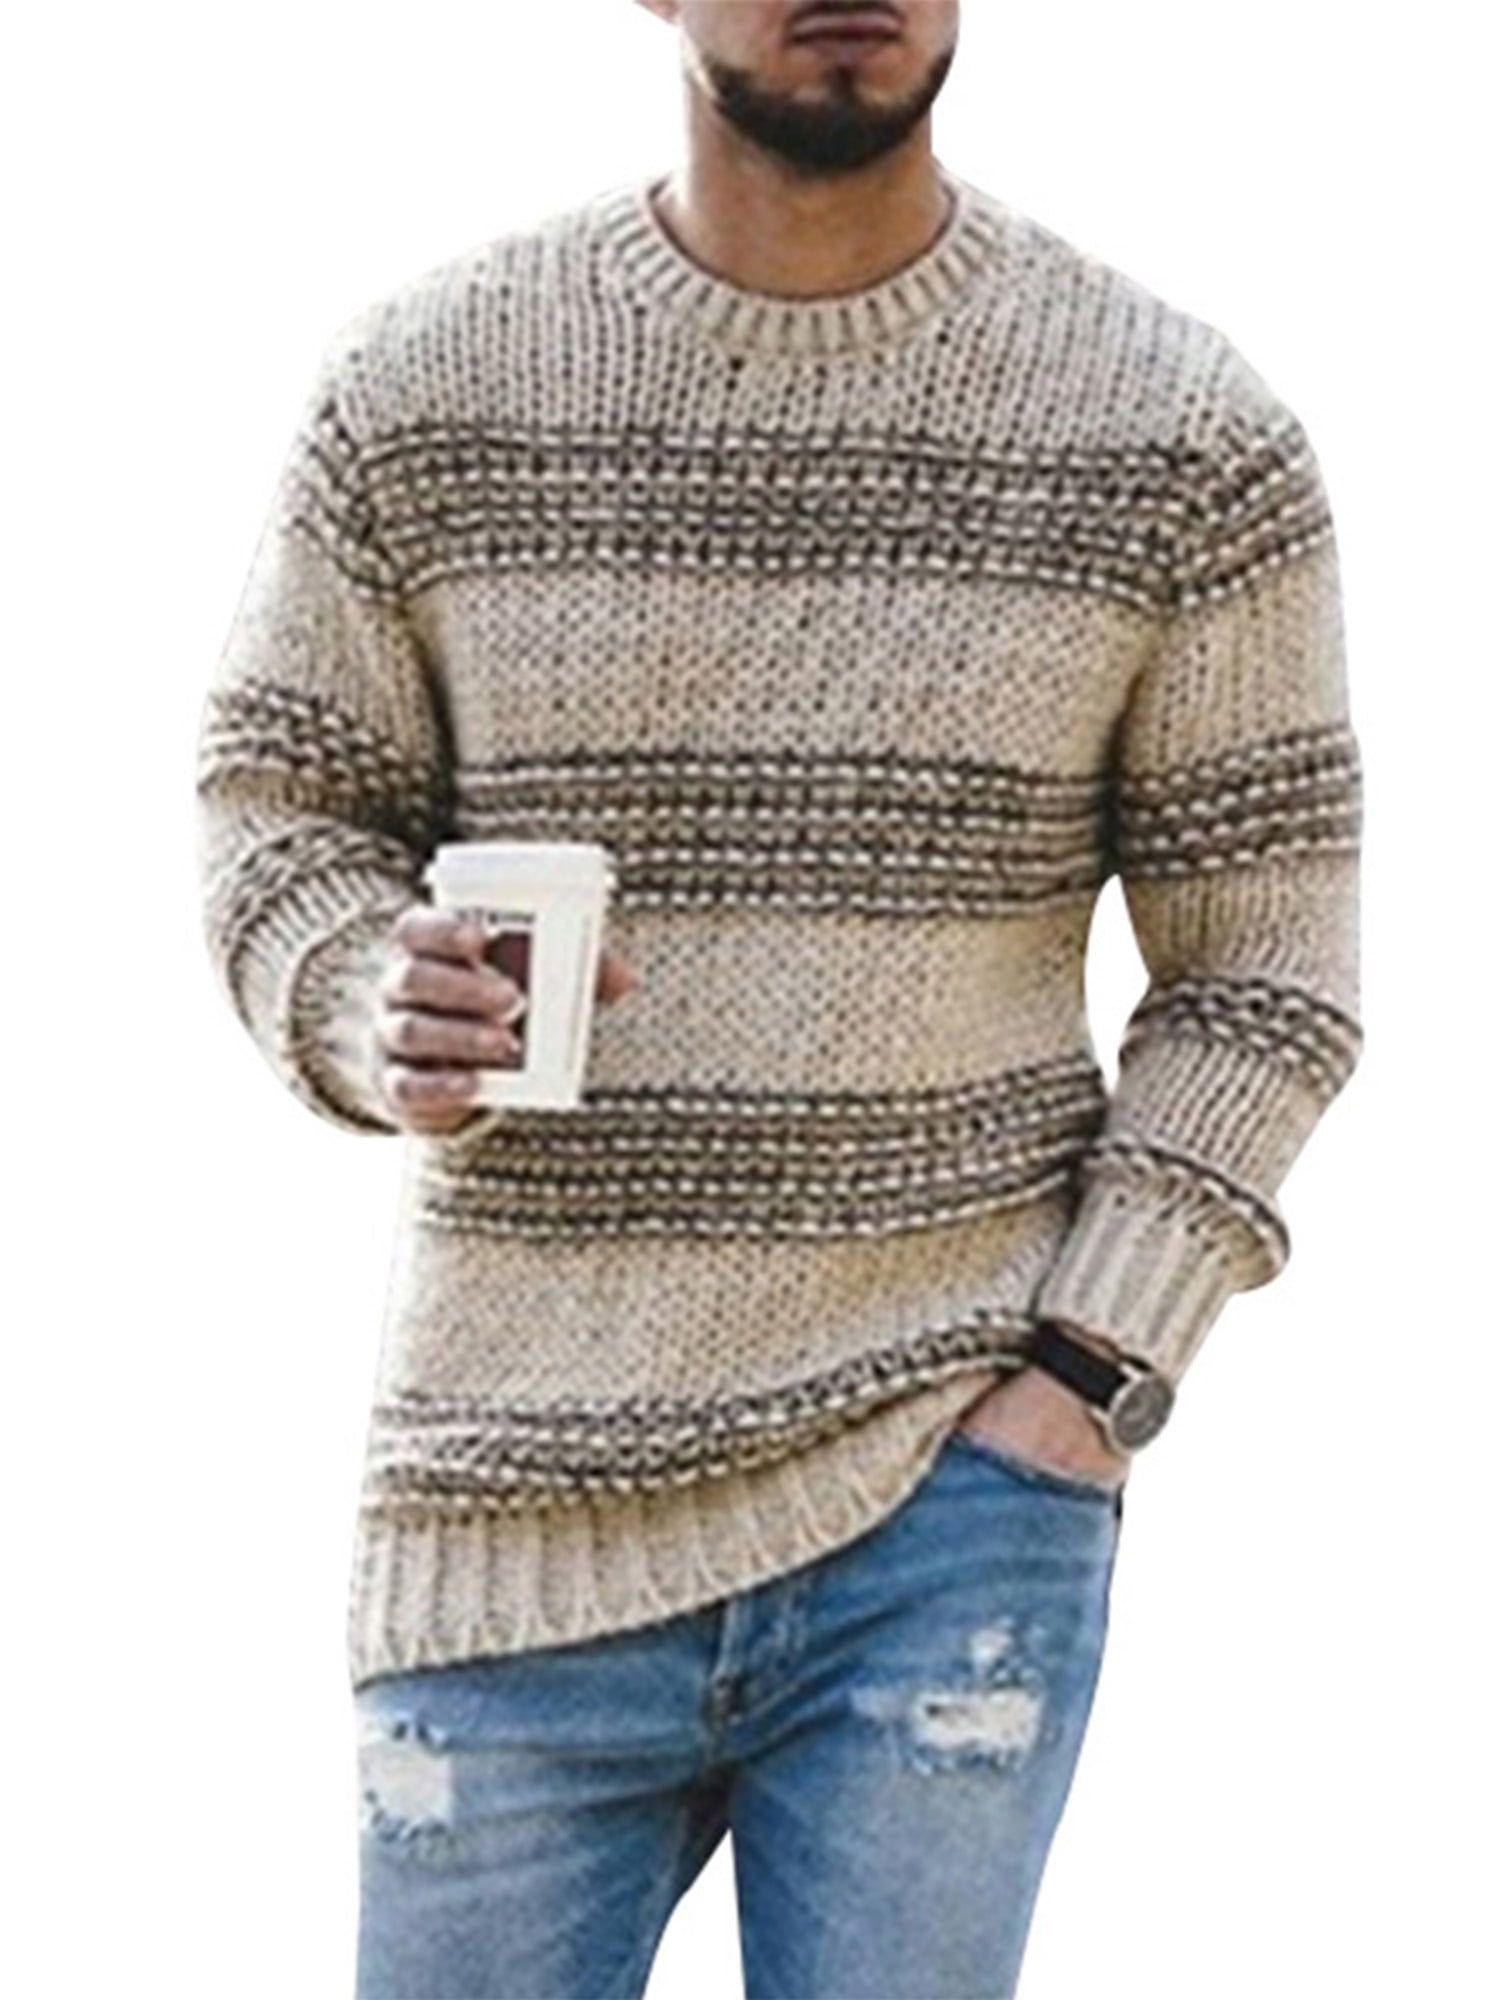 SELX Men Plus Size Casual Long Sleeve Crew Neck Striped Pullover Sweater